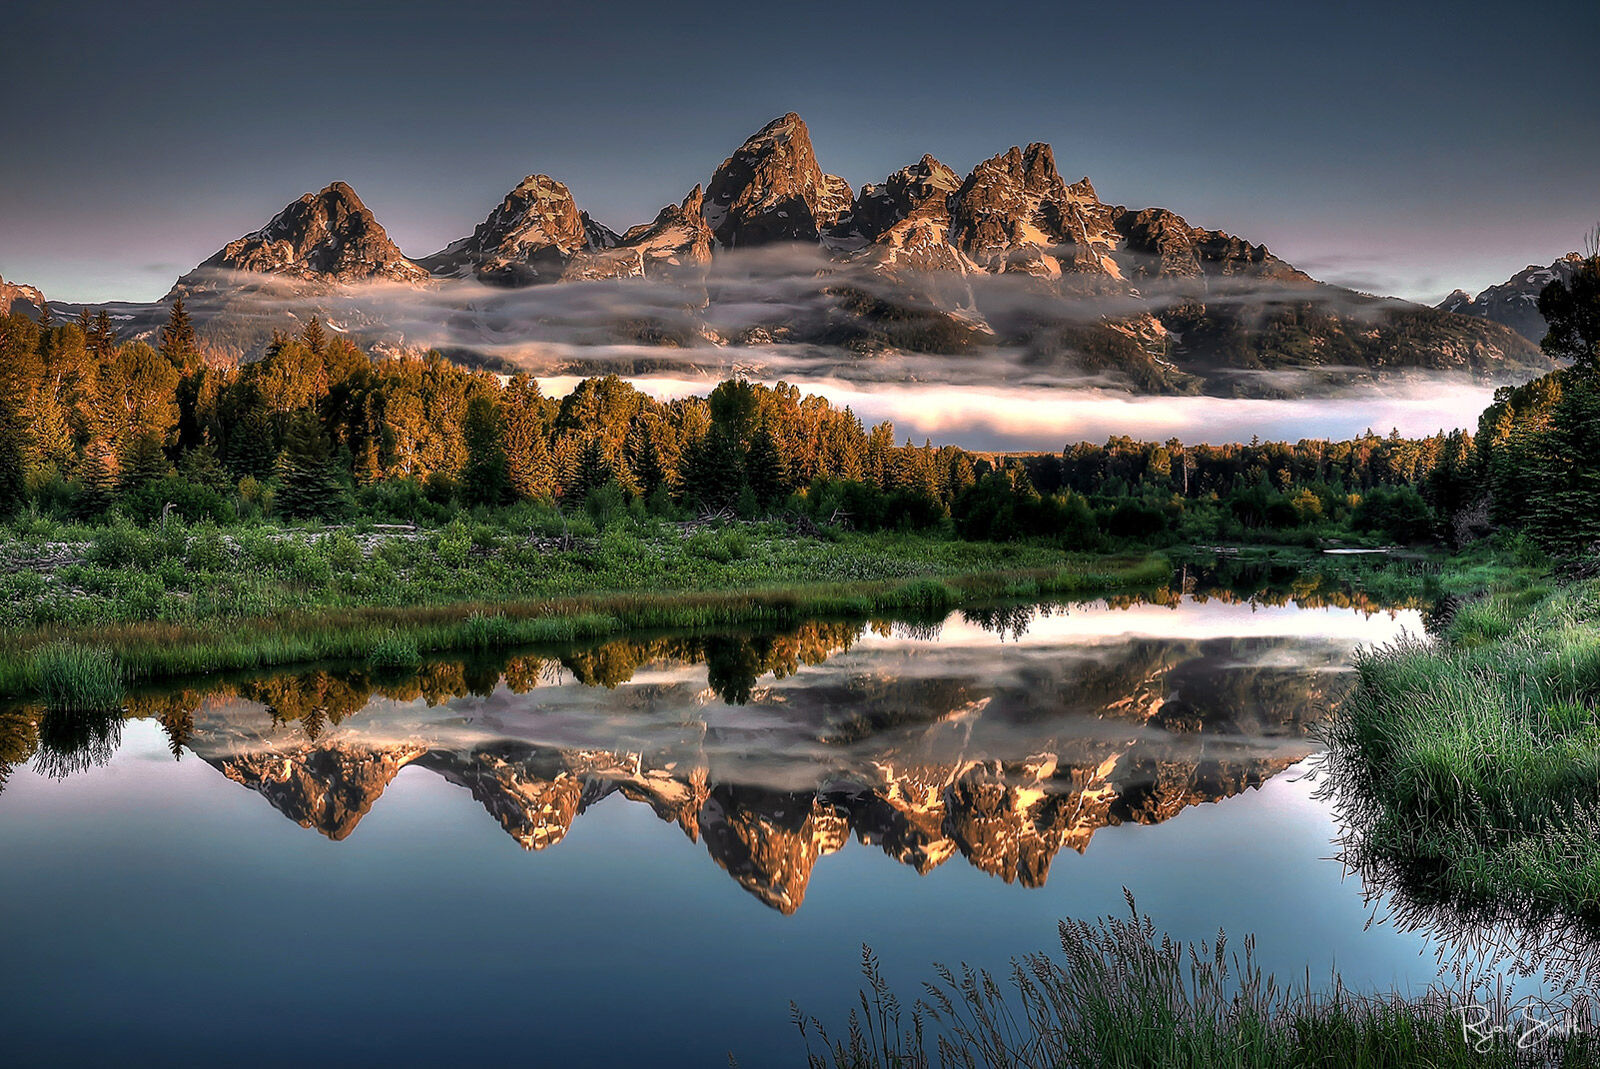 Mountain skyline is seen at sunrise with thin clouds in below the peaks. A lake reflects the mountains, clouds & spruce trees that sit in front of the mountain.